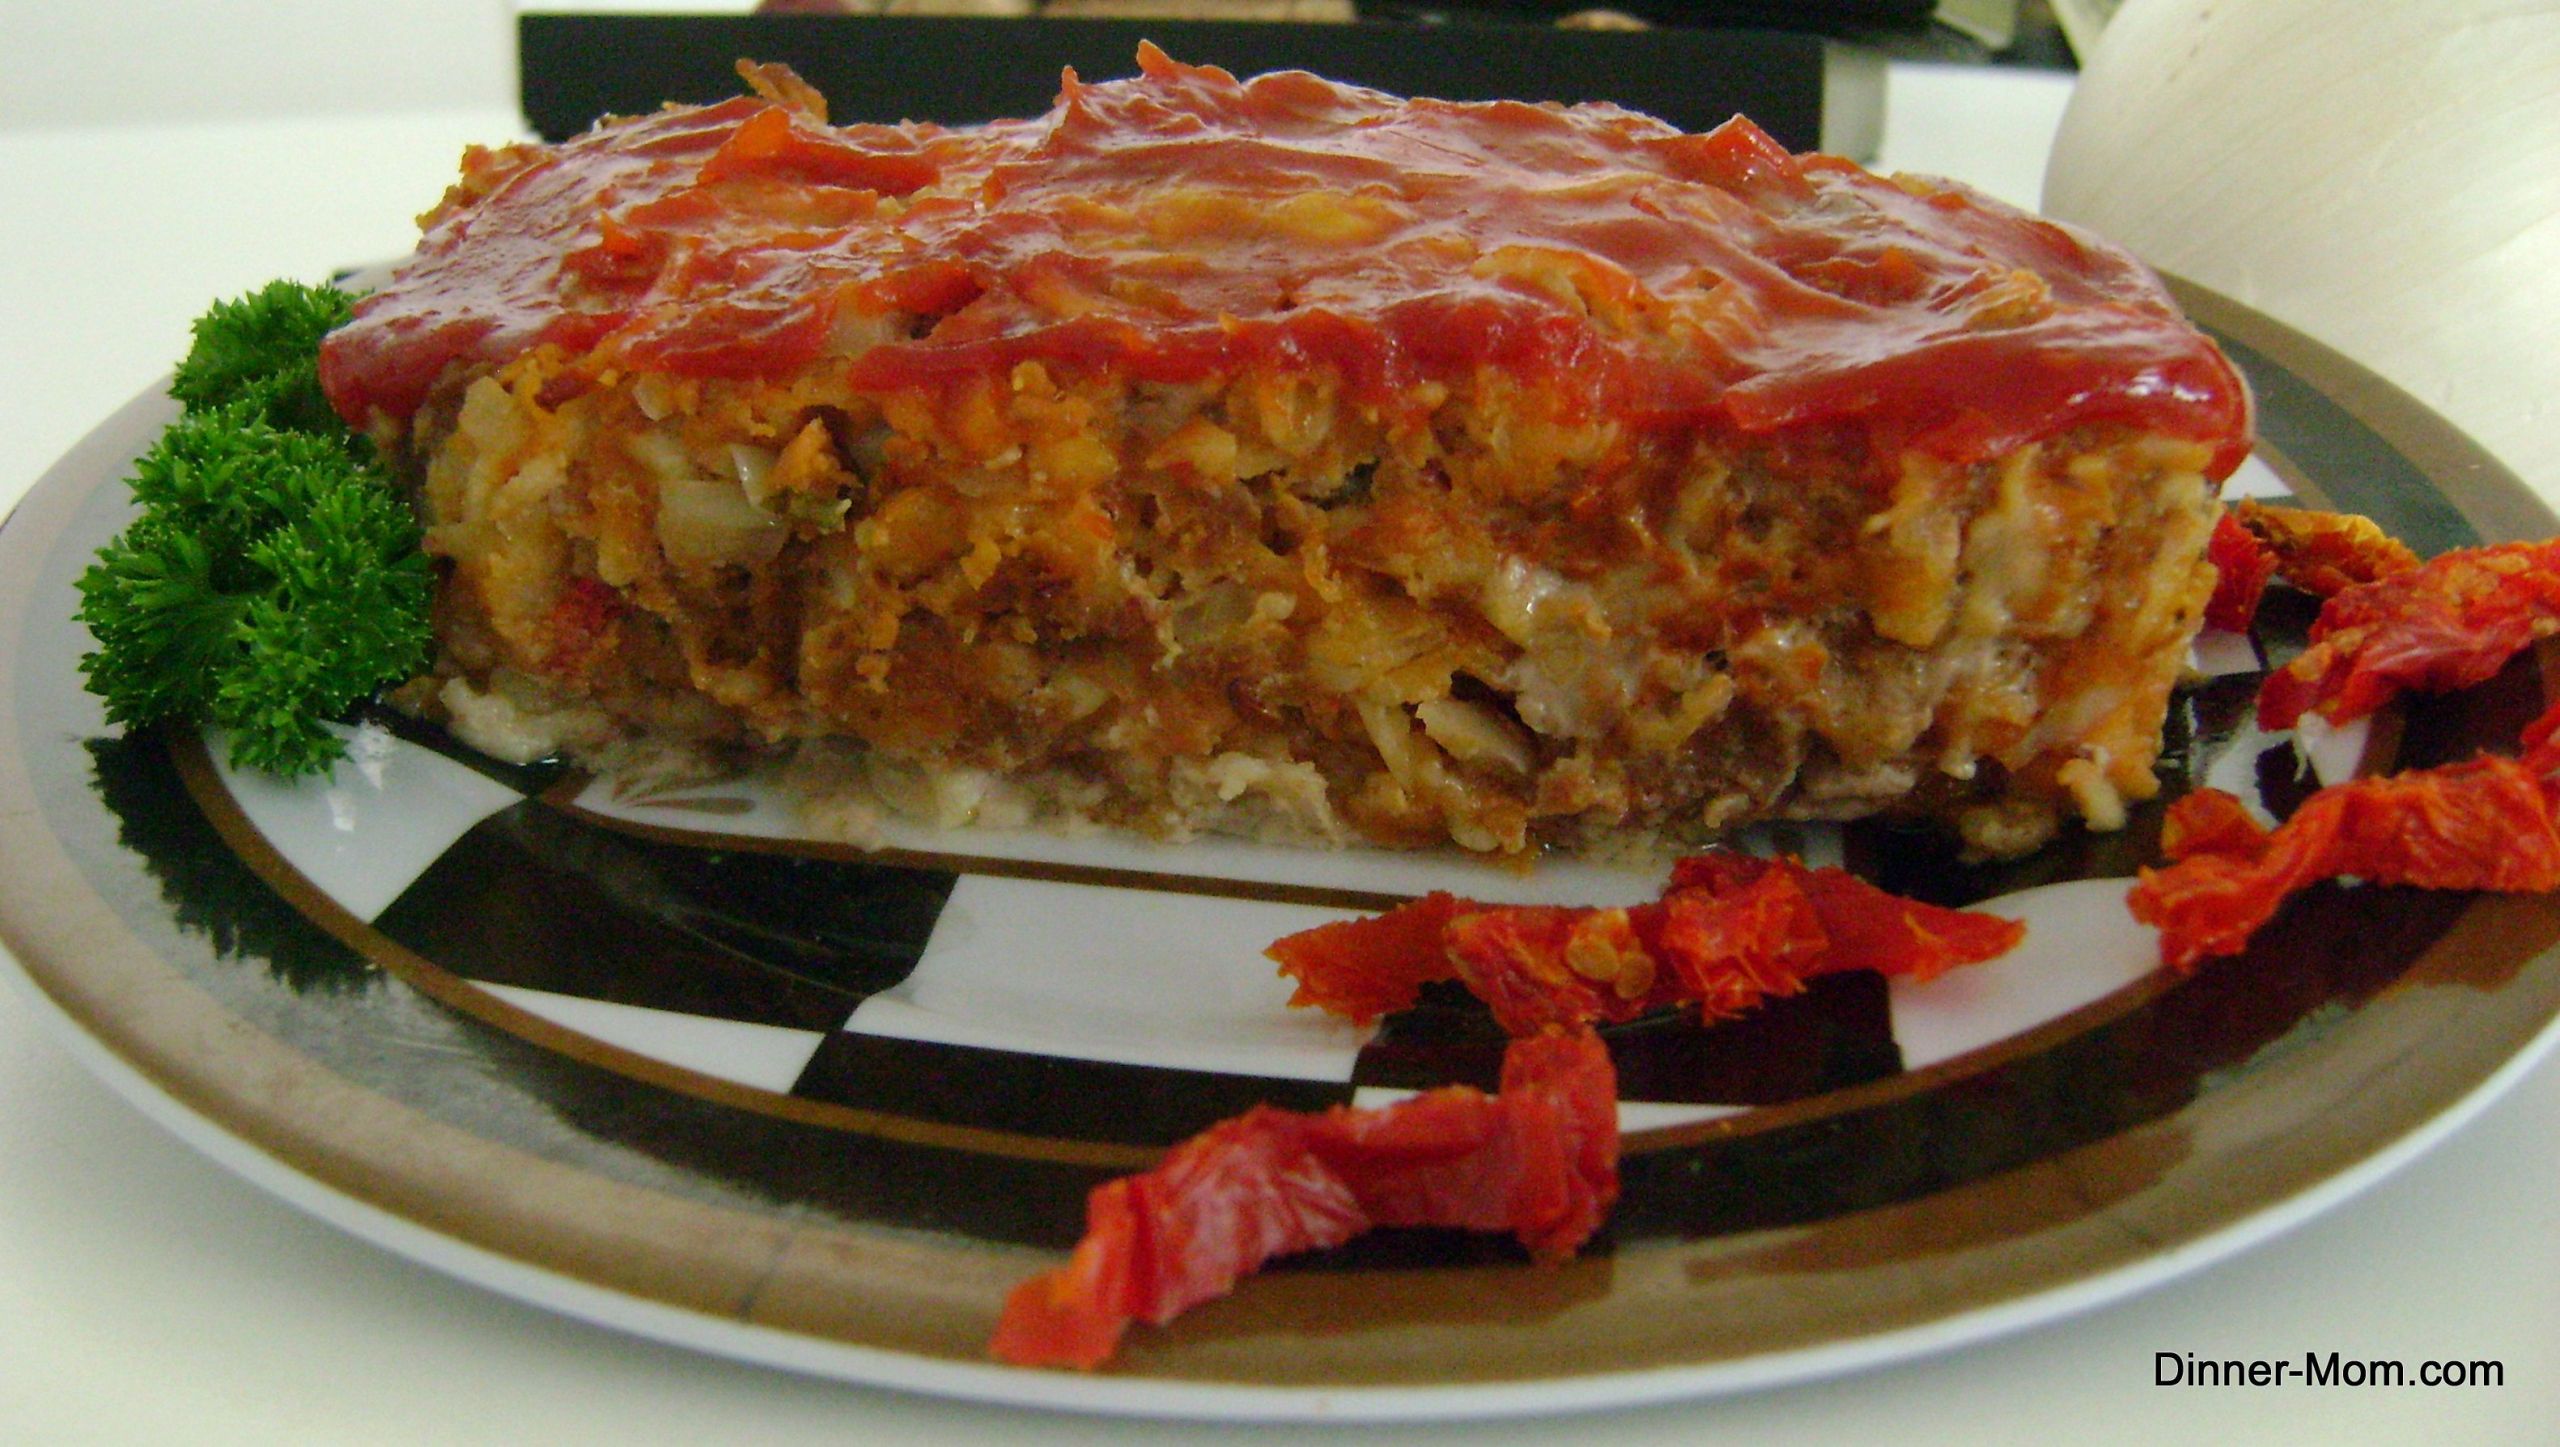 Gourmet Meatloaf Recipe
 Gourmet Meatloaf with Mozzarella and Sundried Tomatoes